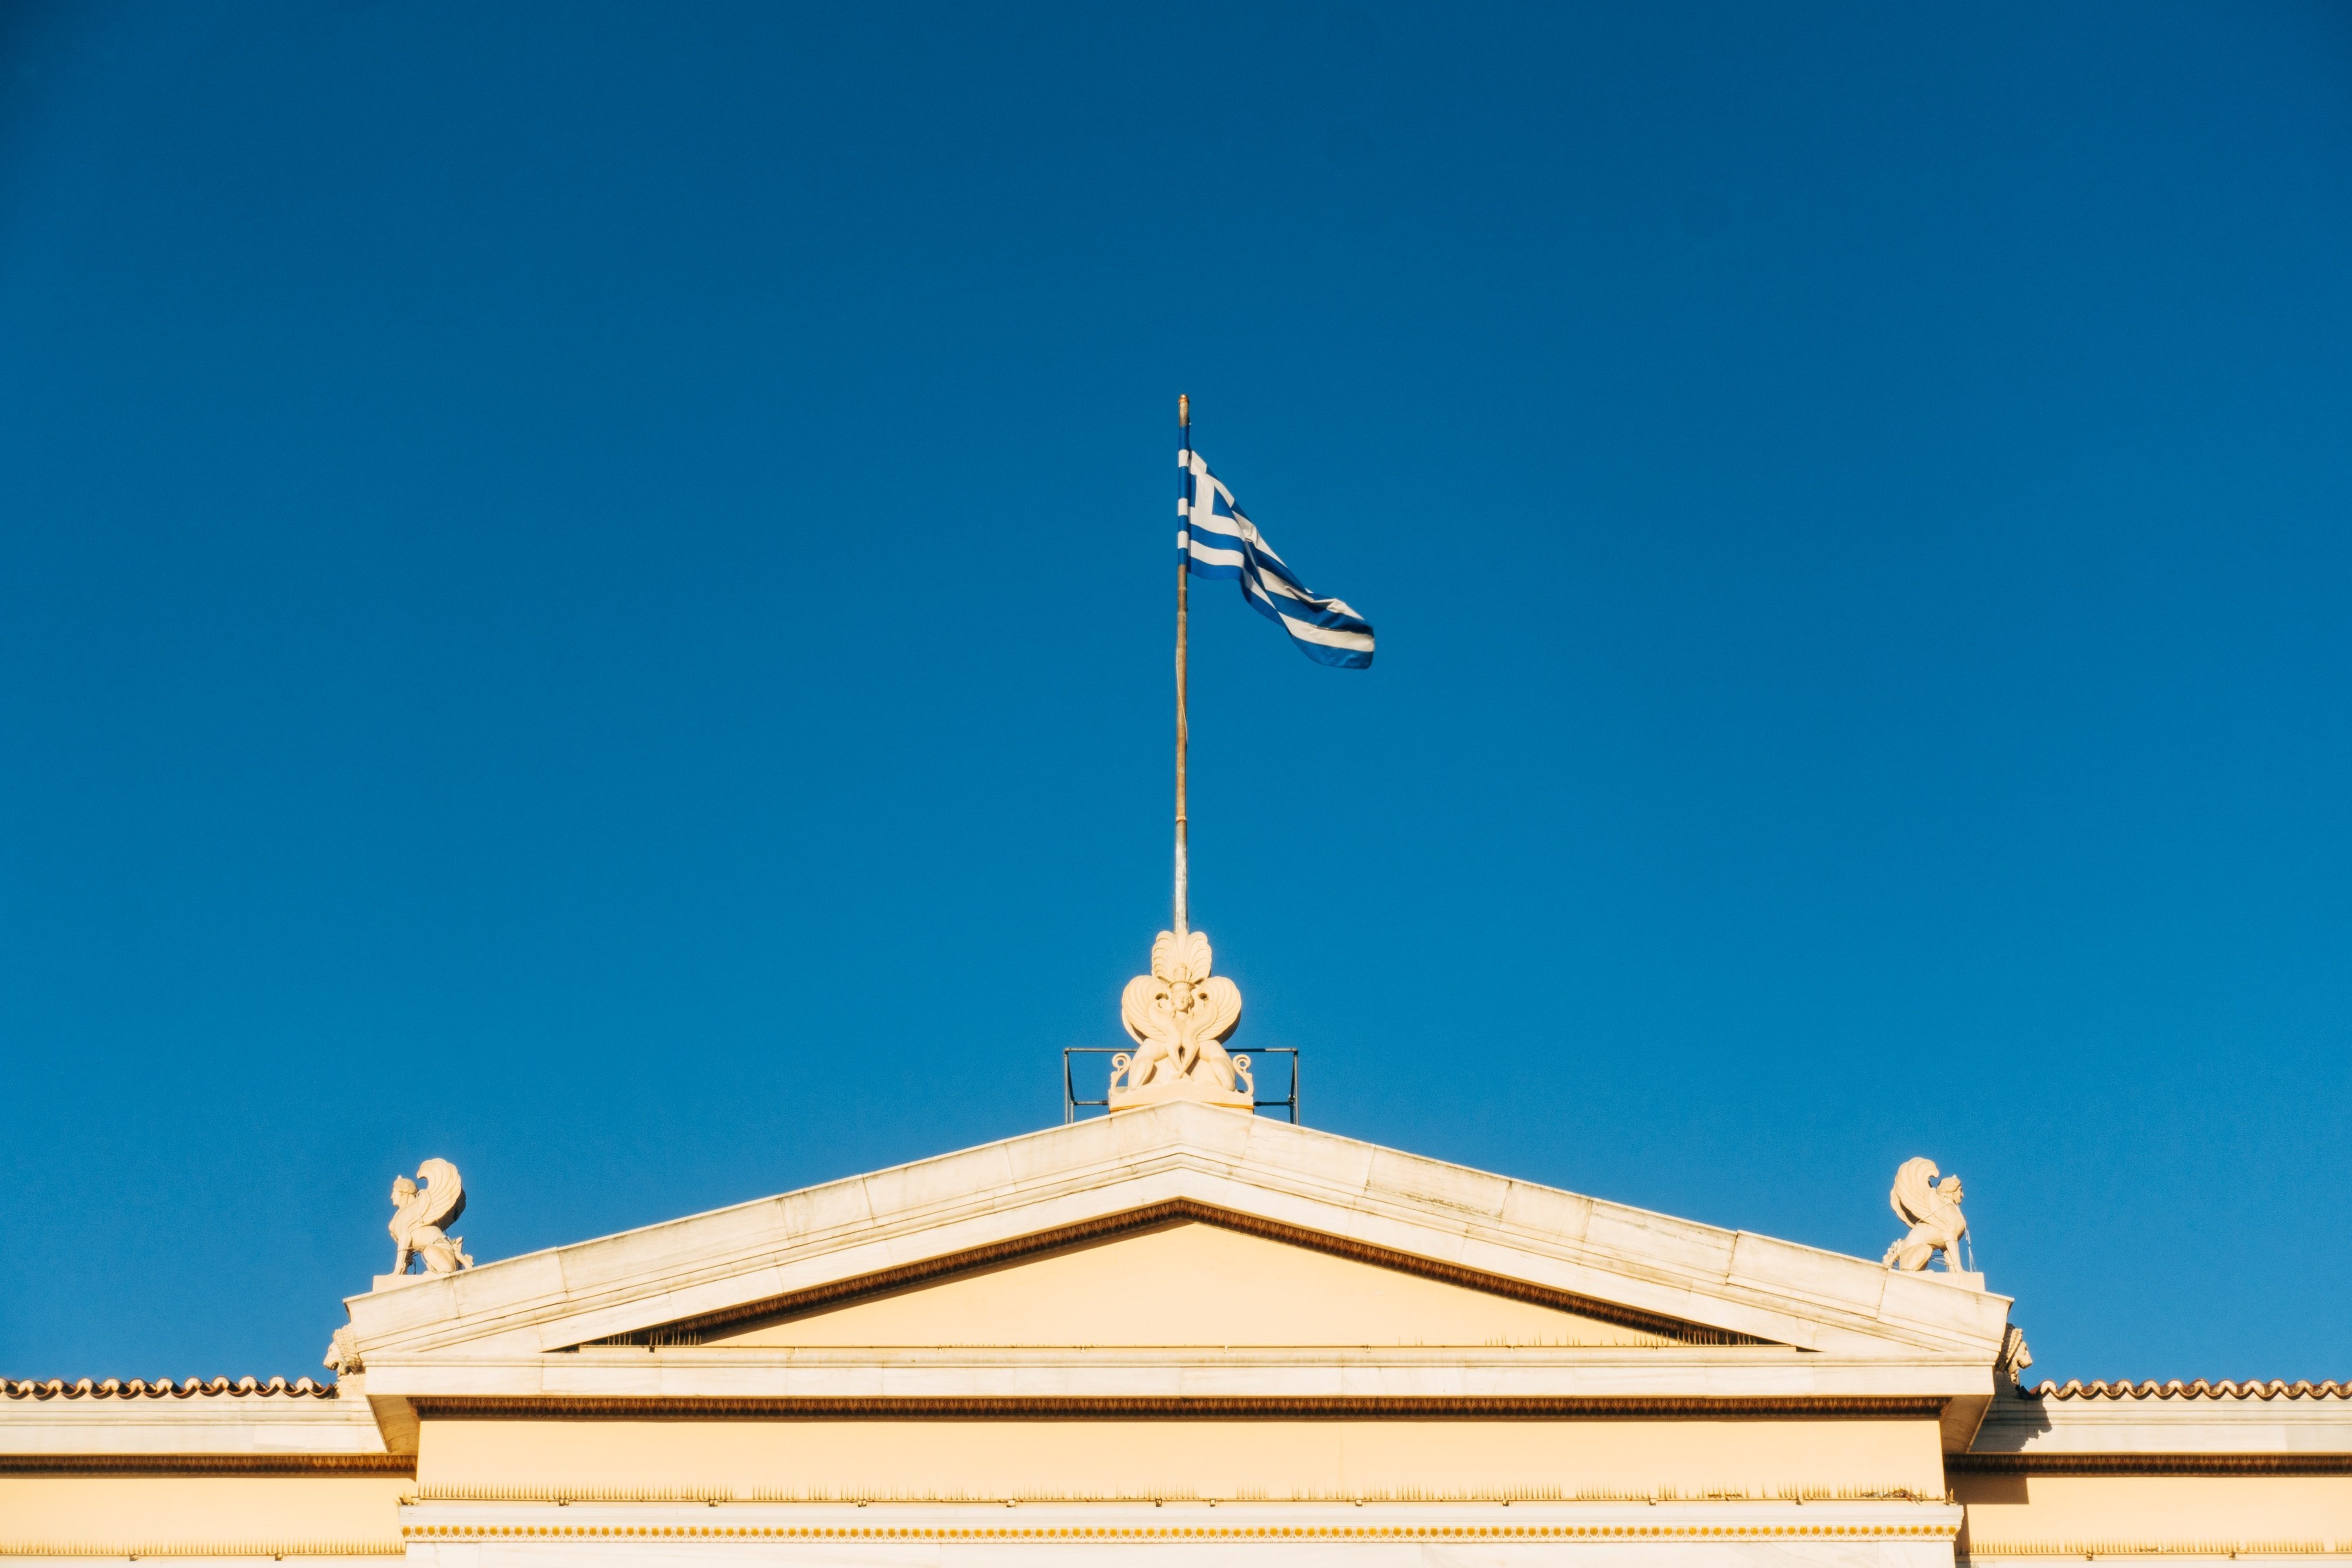 Progress or regression: Greeks face a momentous choice at the upcoming election